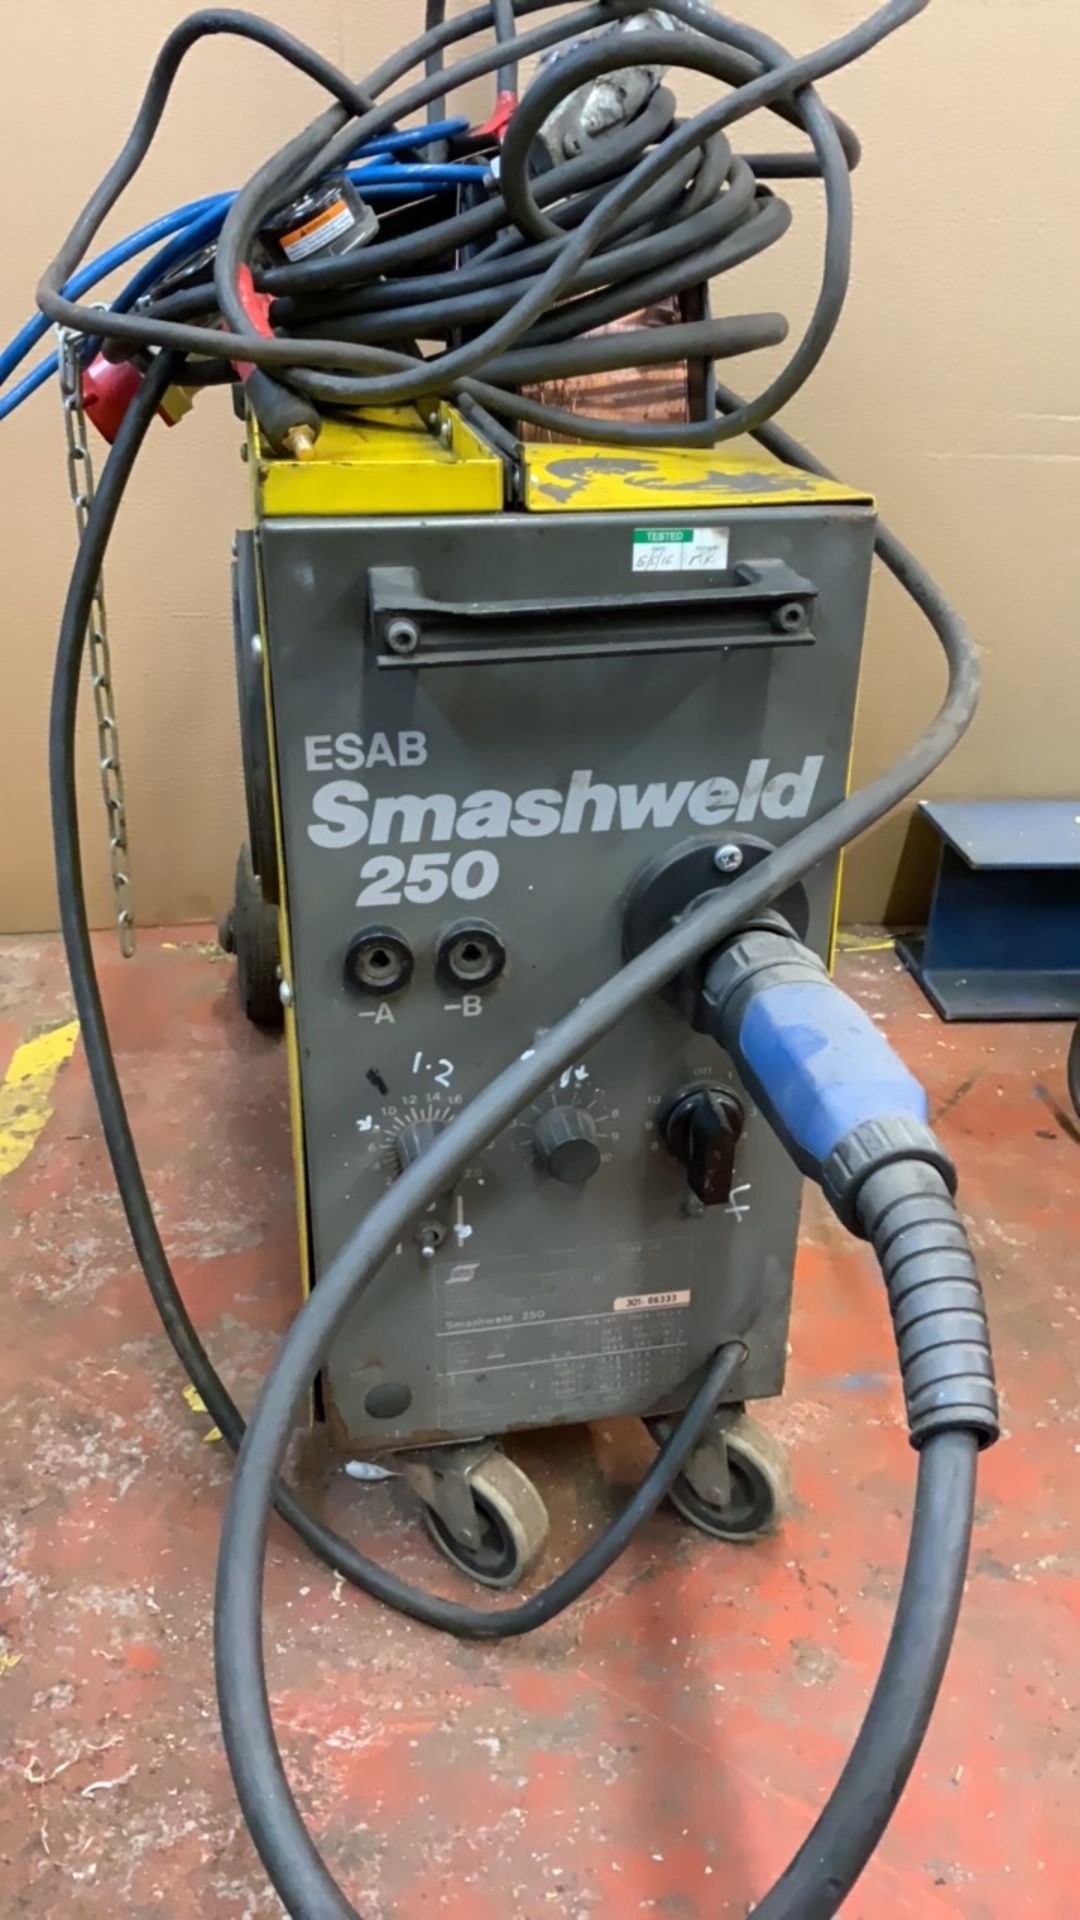 ESAB Smashweld 250, Welder, Serial No. 301-06333 with wire feed and part roll of wire - Image 9 of 14